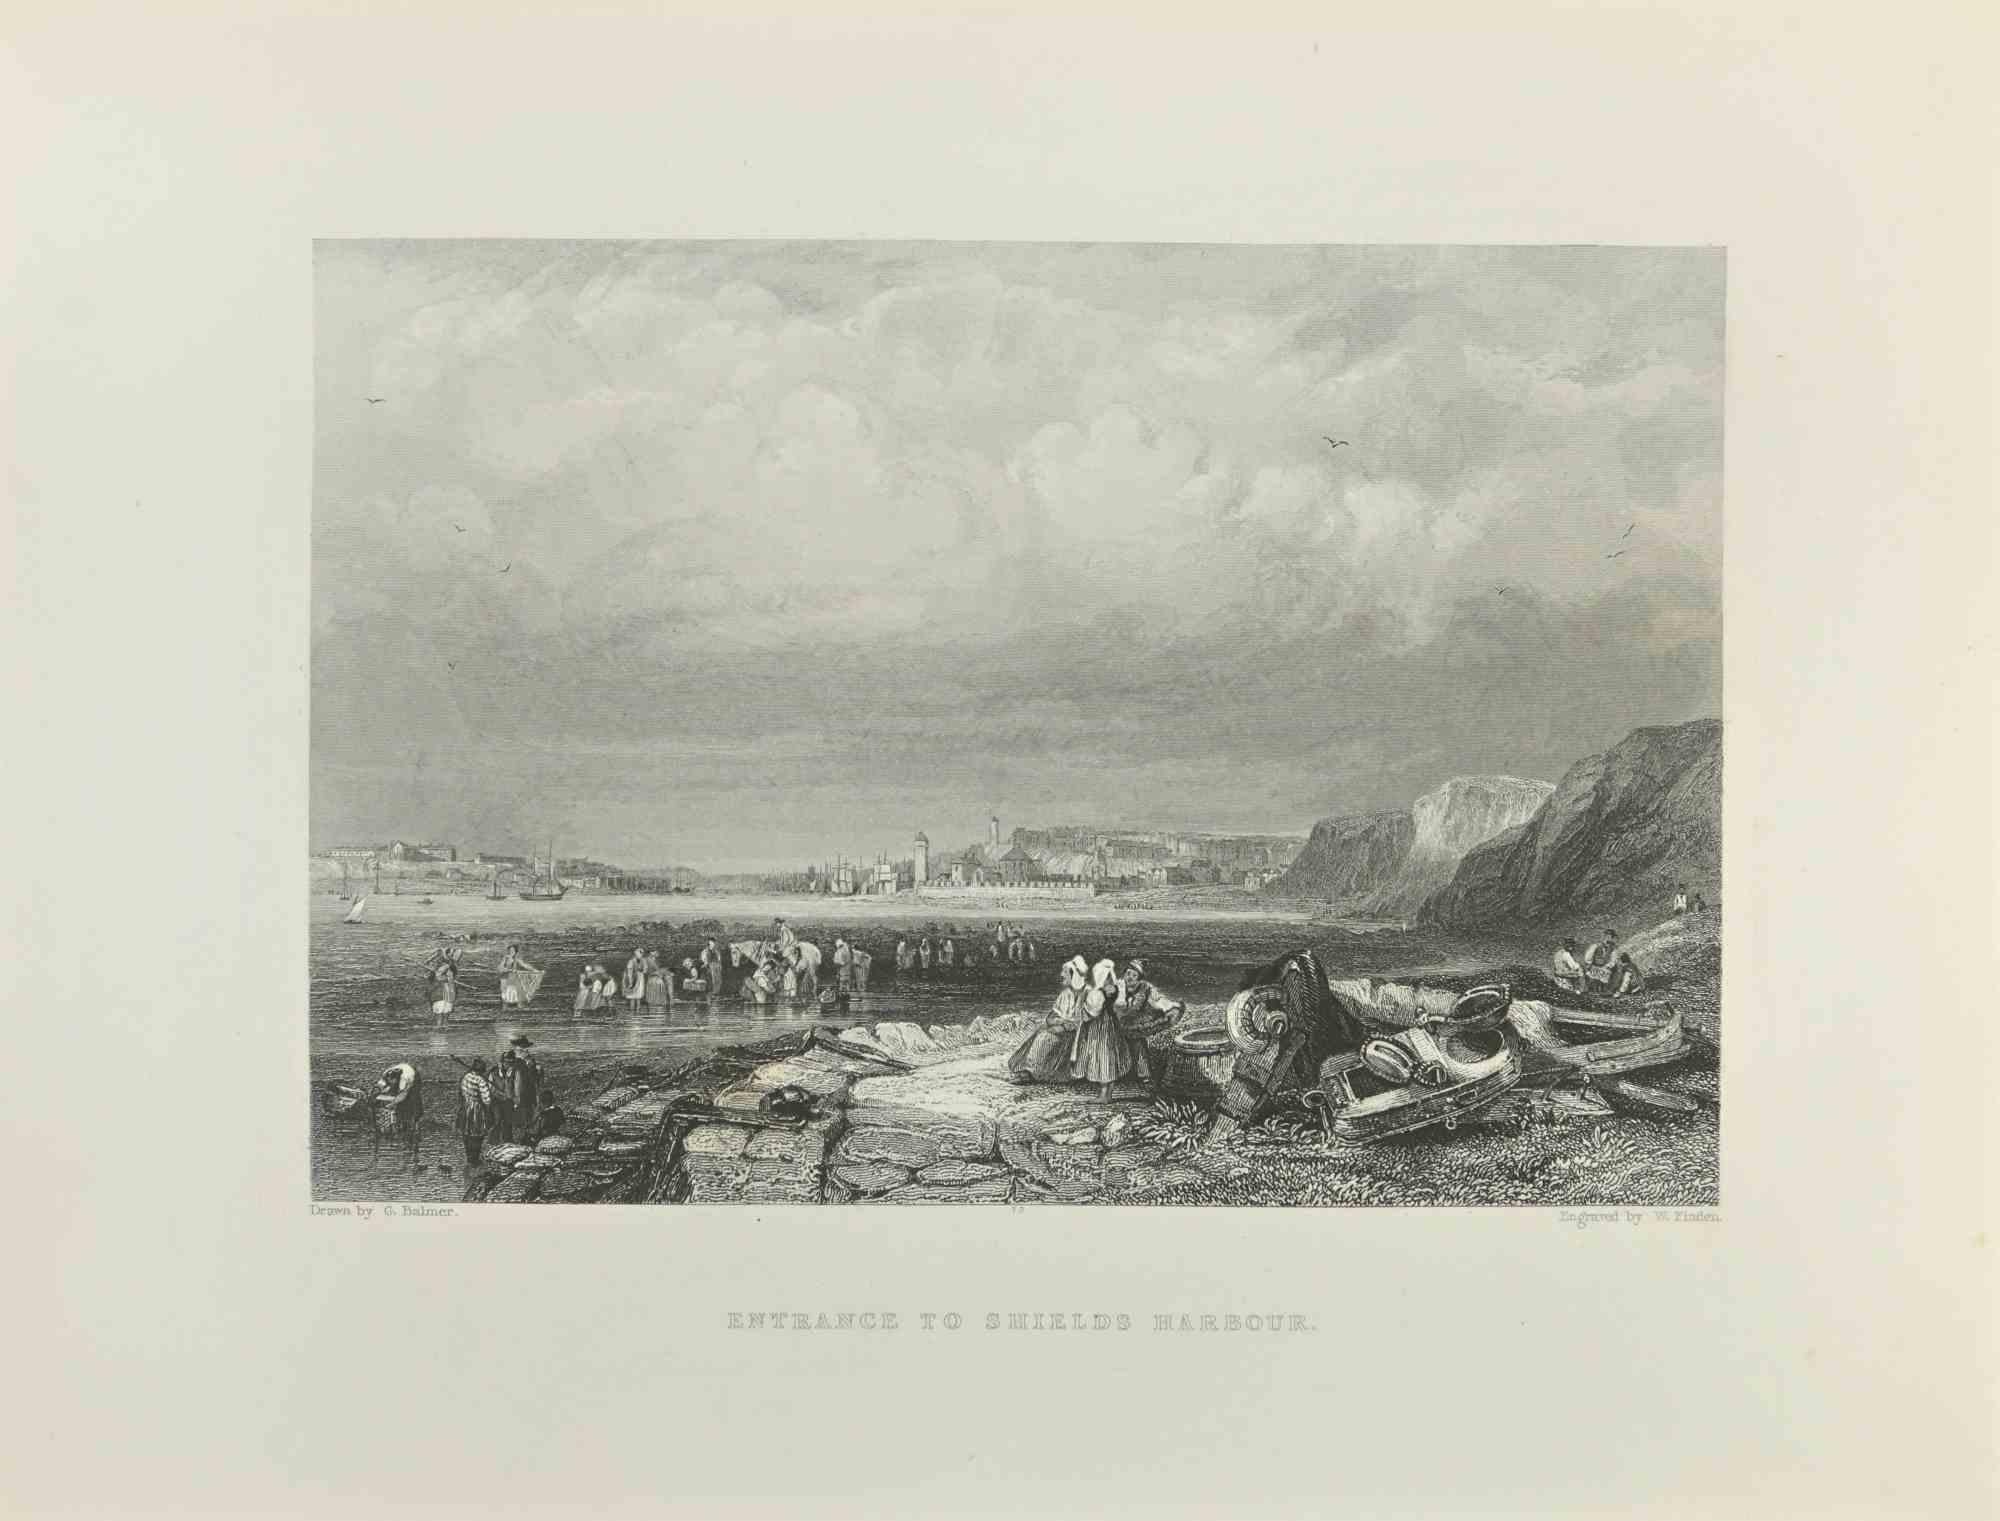 Edward Francis Finden Figurative Print - Entrance to Shields Harbour - Engraving by E. Finden - 1845